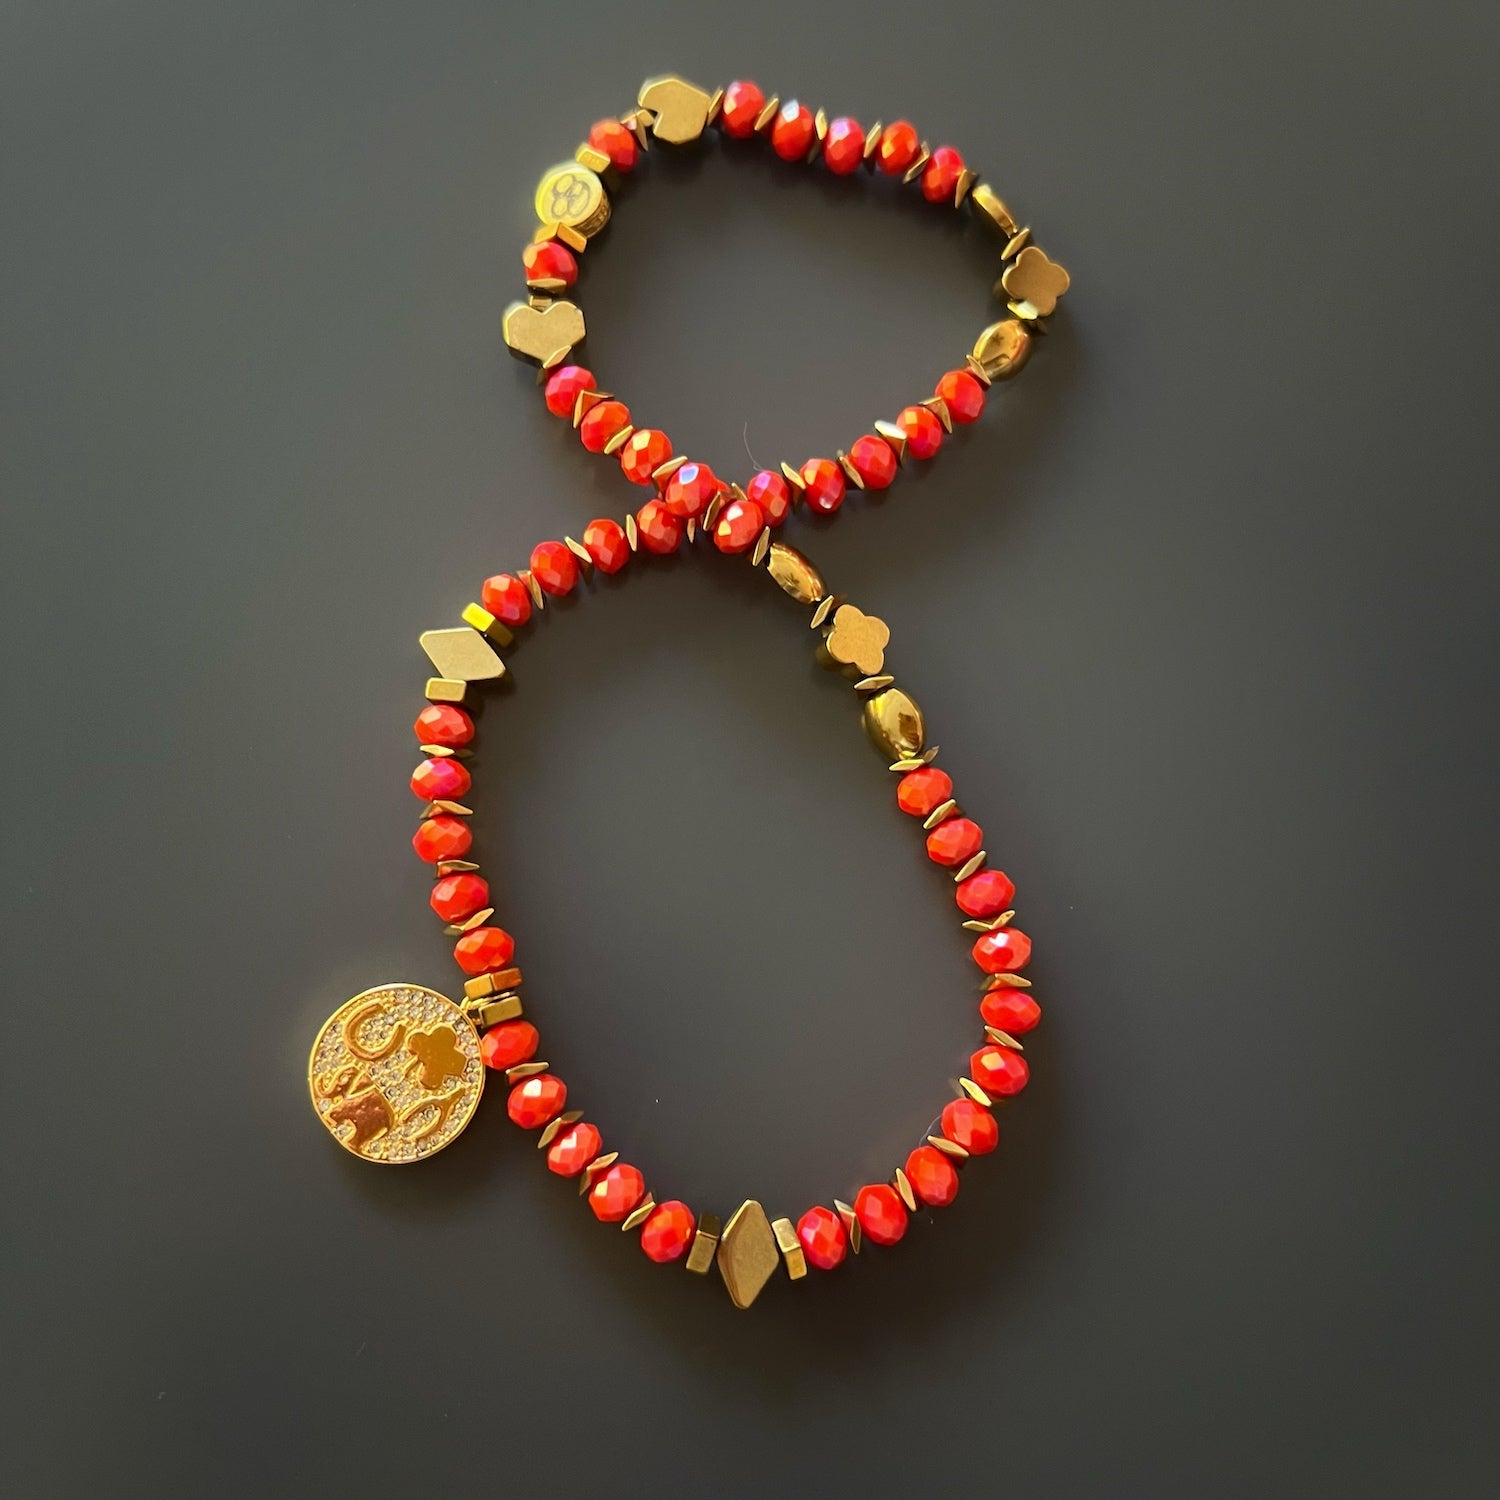 Make a statement with the Lucky Symbol Bracelet, showcasing orange crystal beads and a gold symbol charm